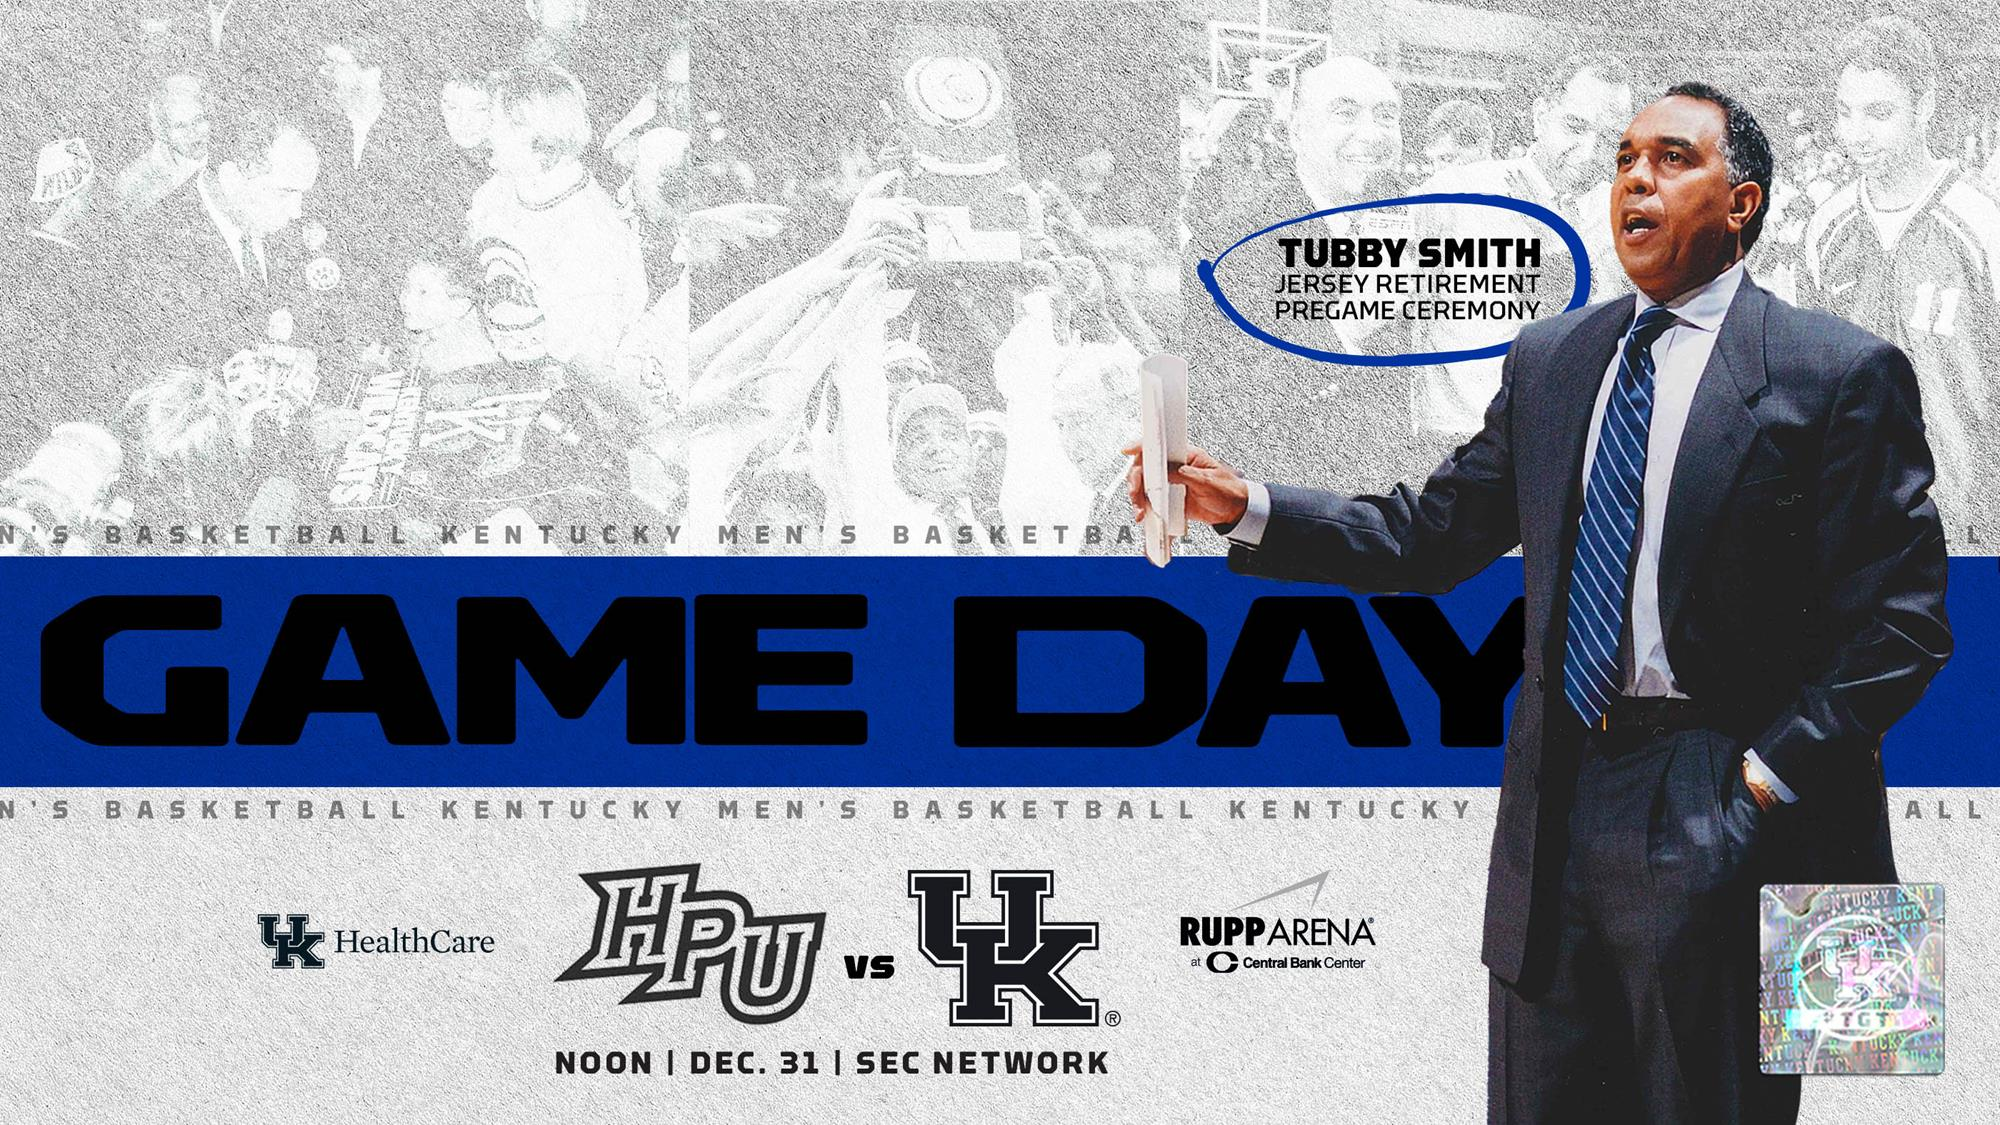 Kentucky Set to Host High Point, Honor Tubby Smith